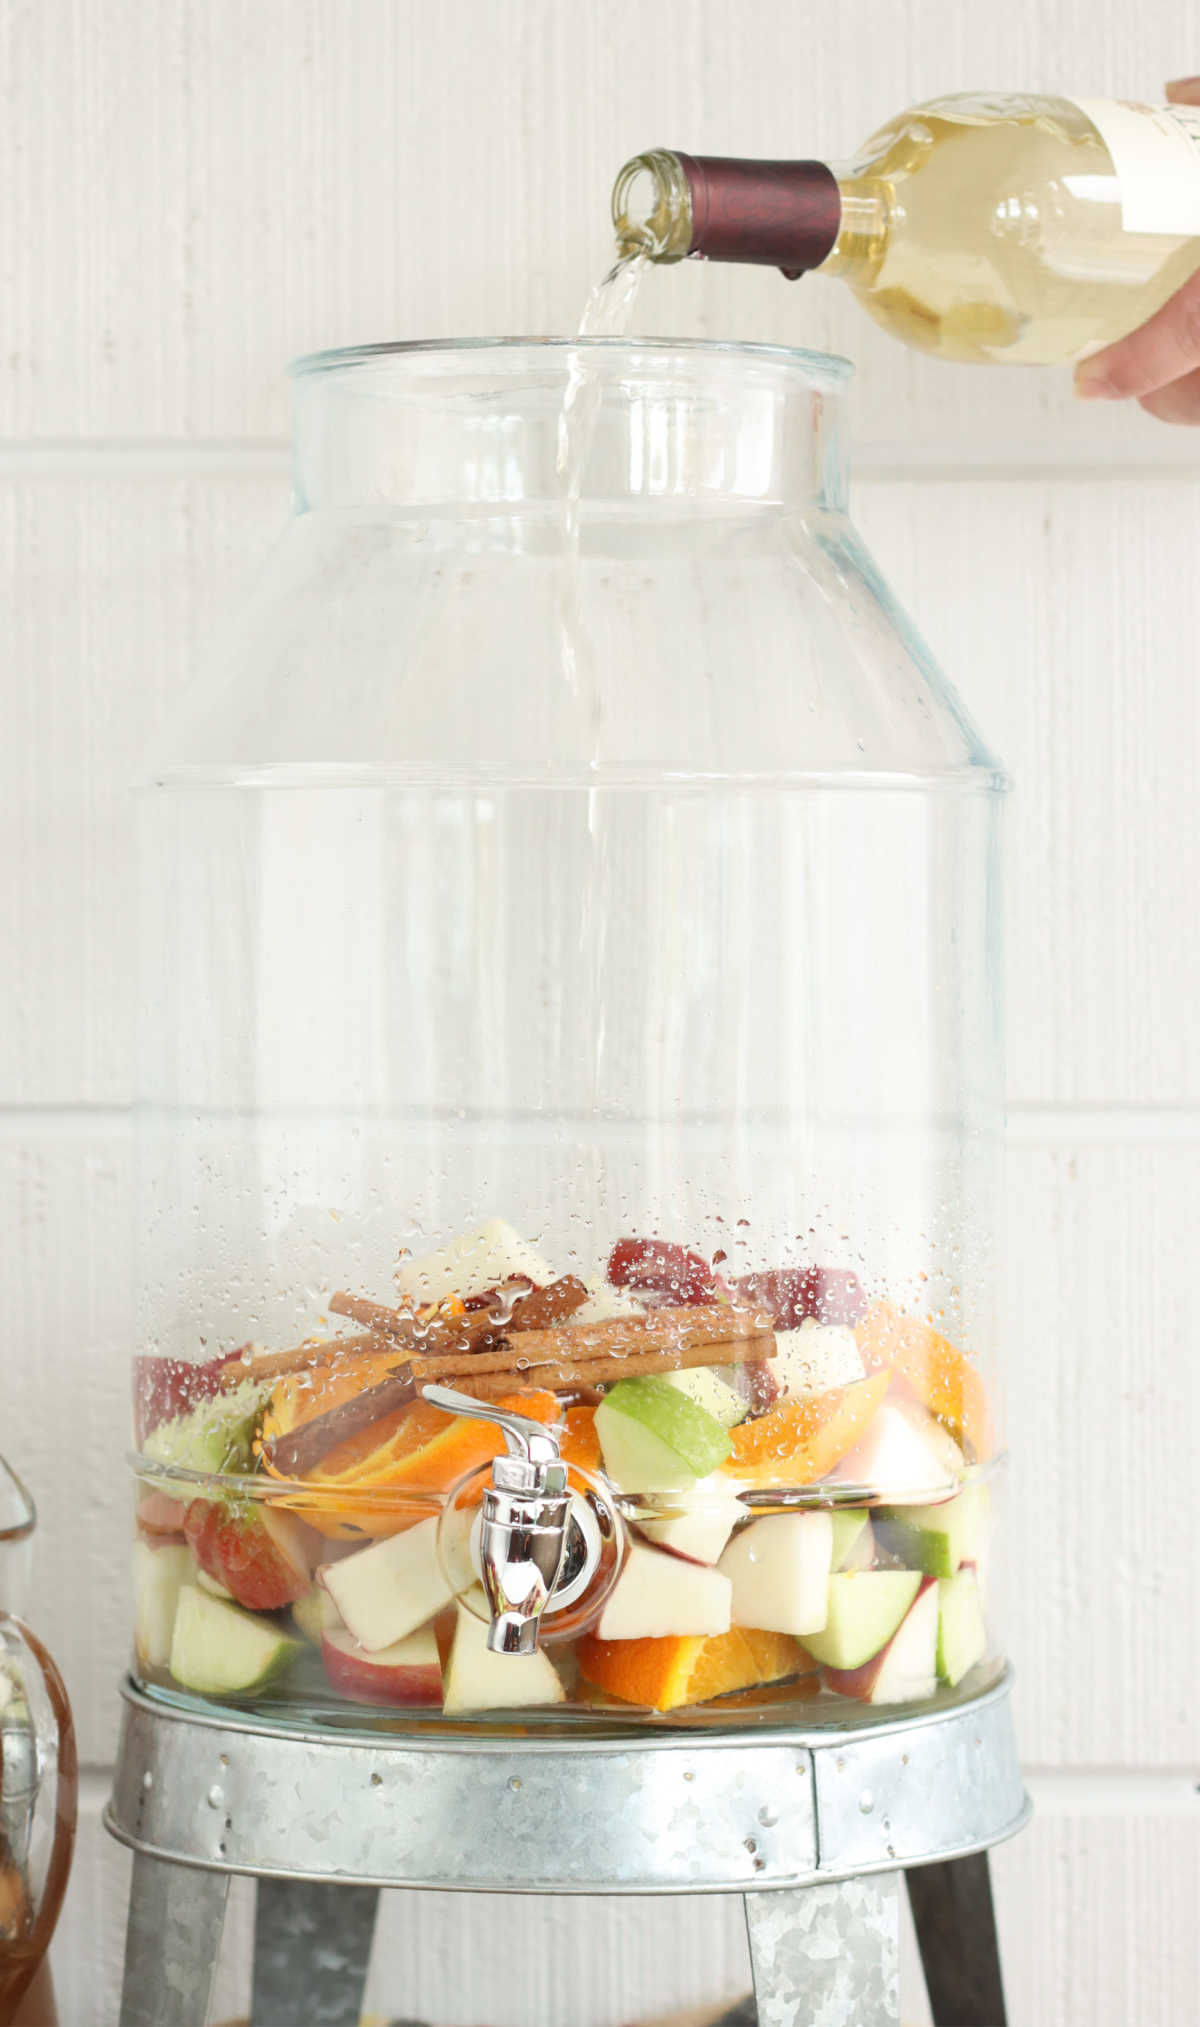 Pouring white wine into clear glass drink dispenser filled with apple and orange chunks.